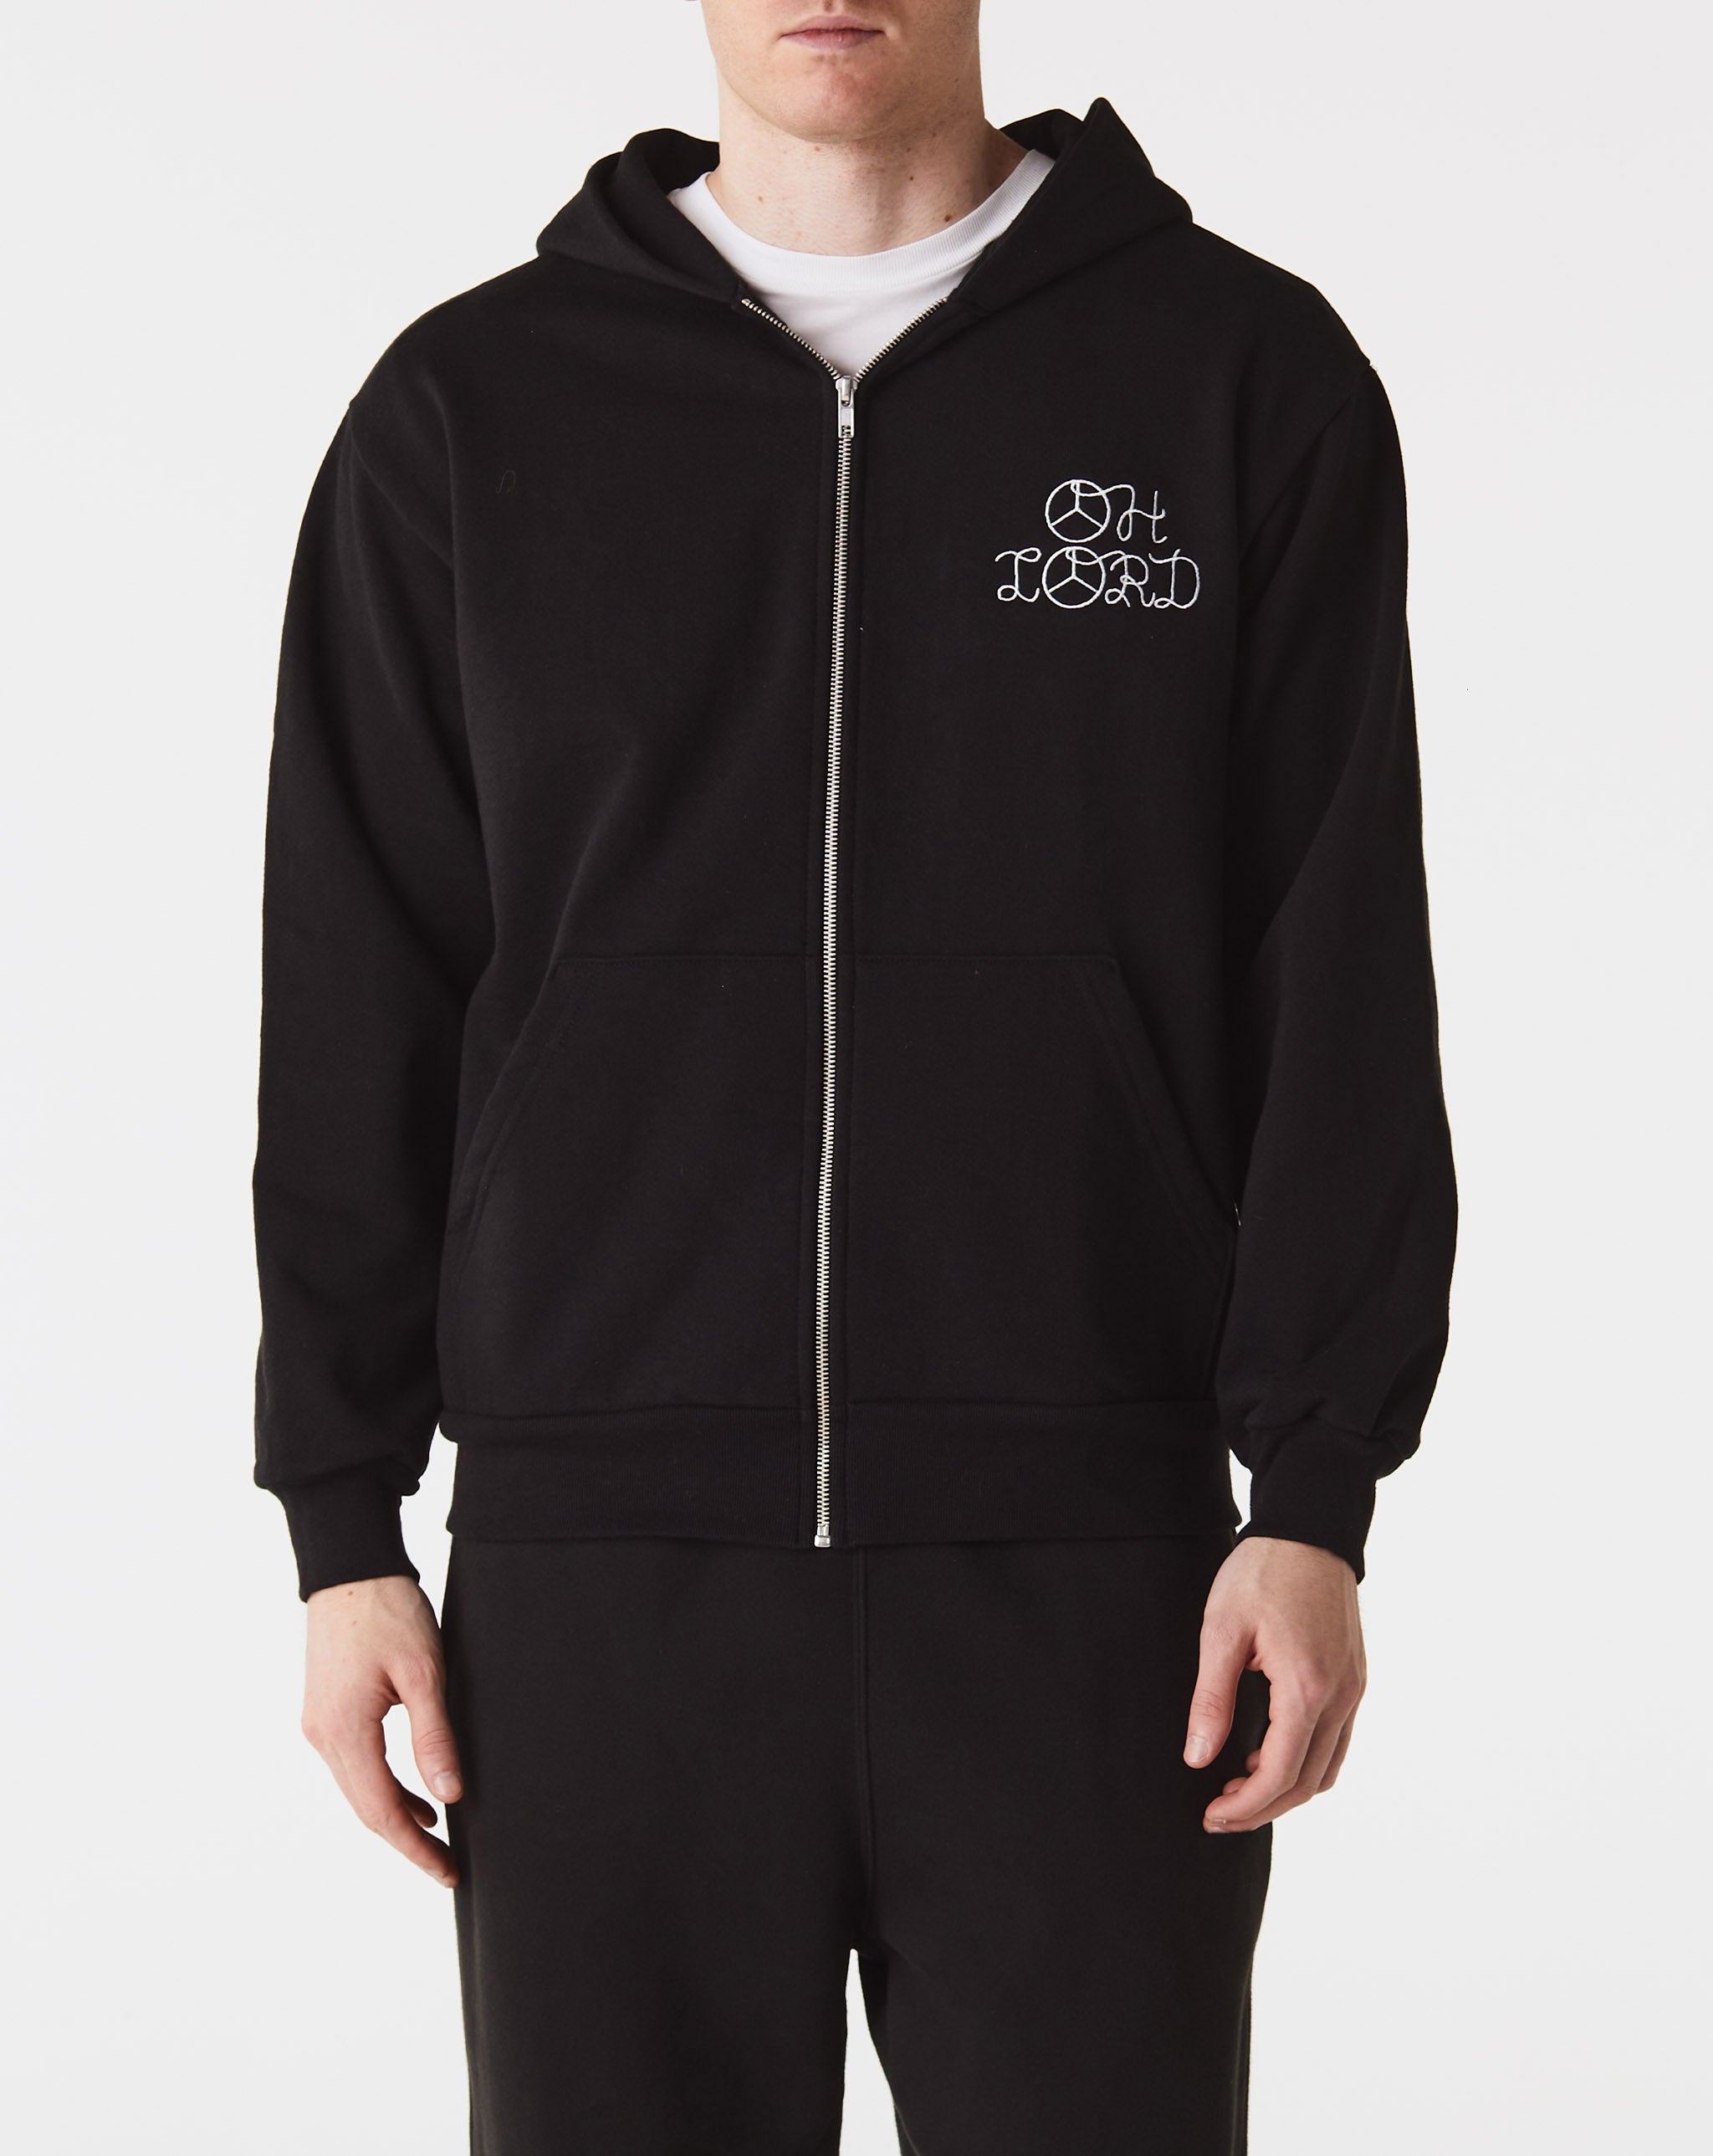 Joe Horner 'Oh Lord' Embroidered Full Zip Hoodie  - XHIBITION